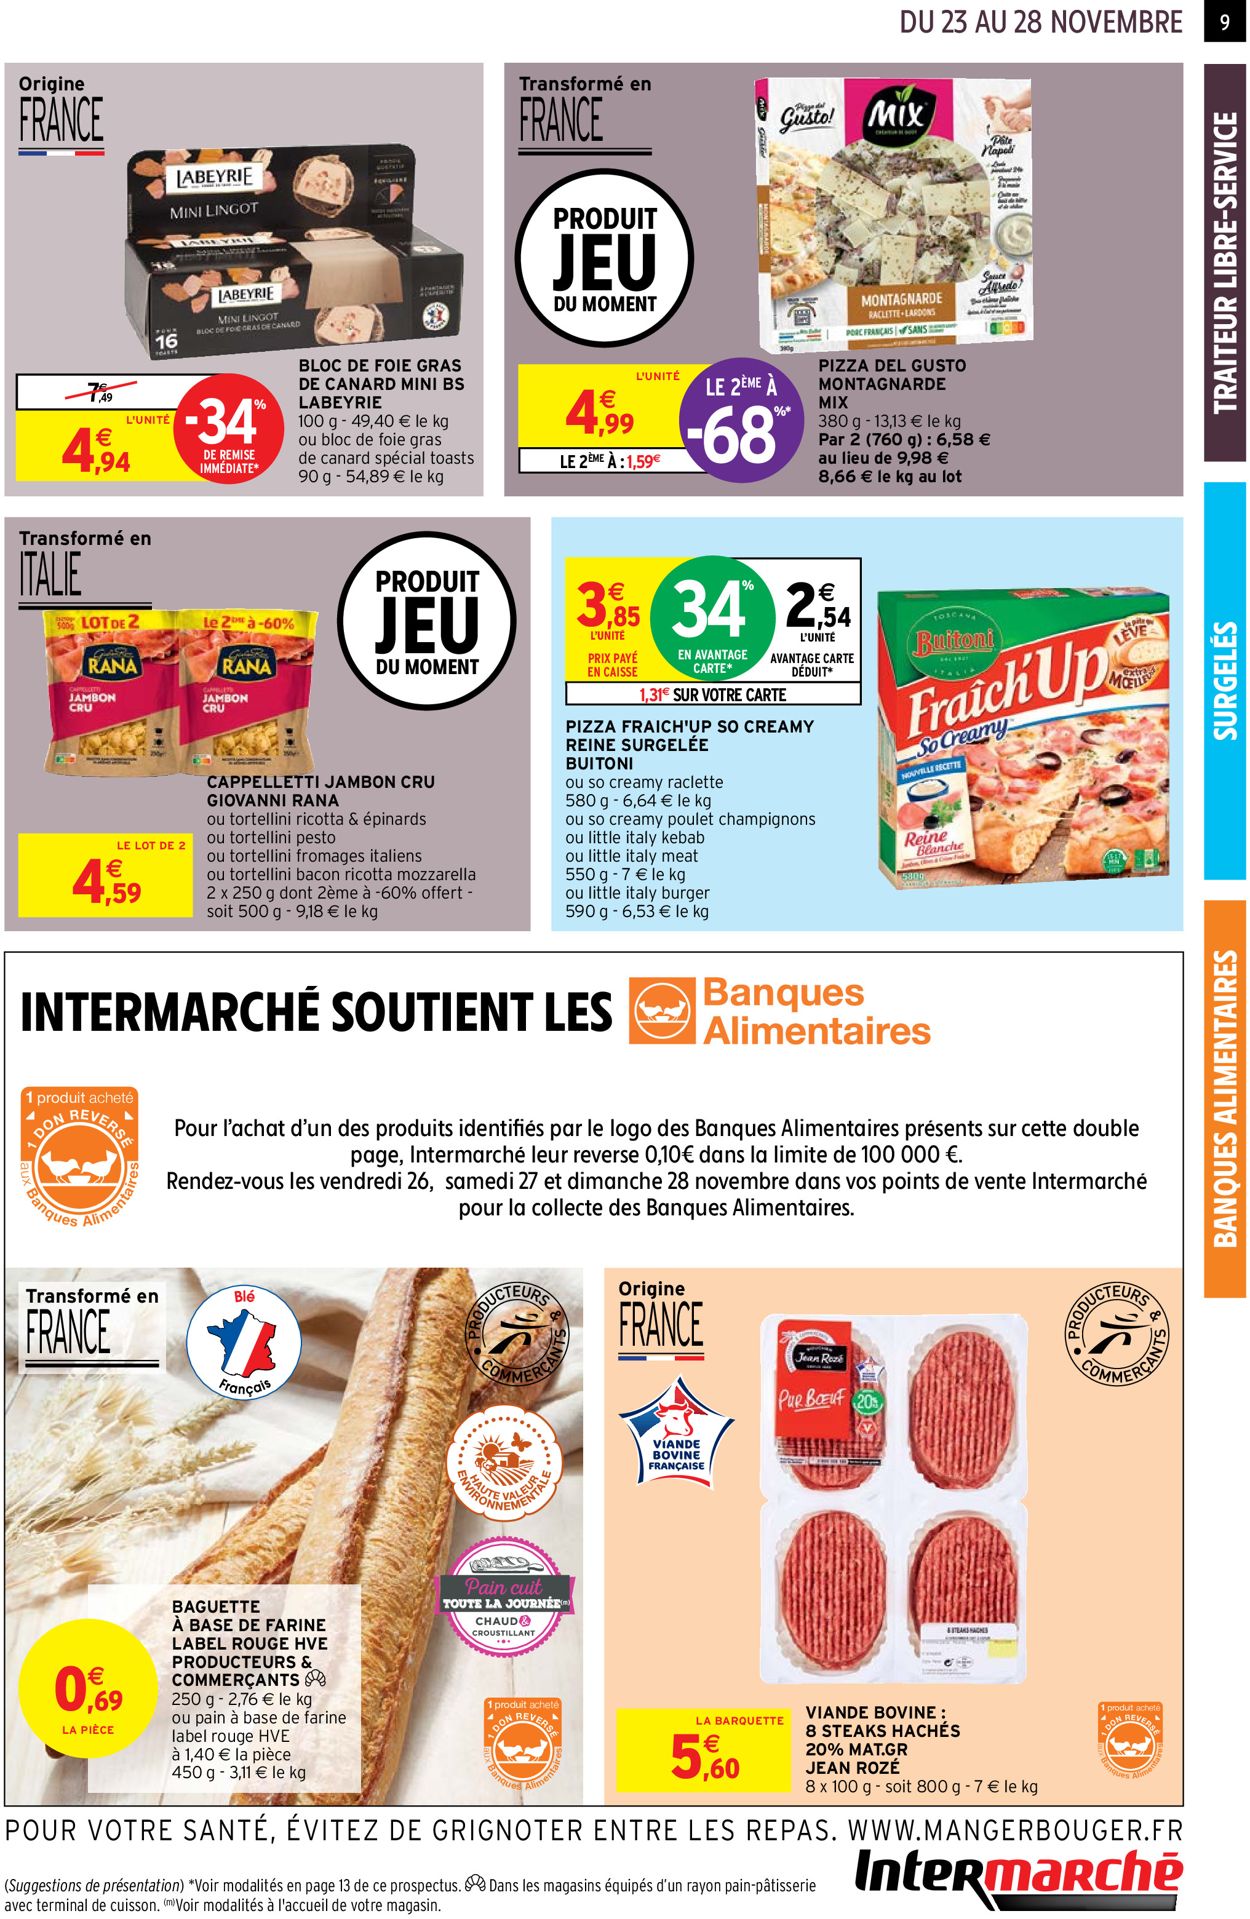 Intermarché  BLACK WEEK 2021 Catalogue - 23.11-28.11.2021 (Page 9)